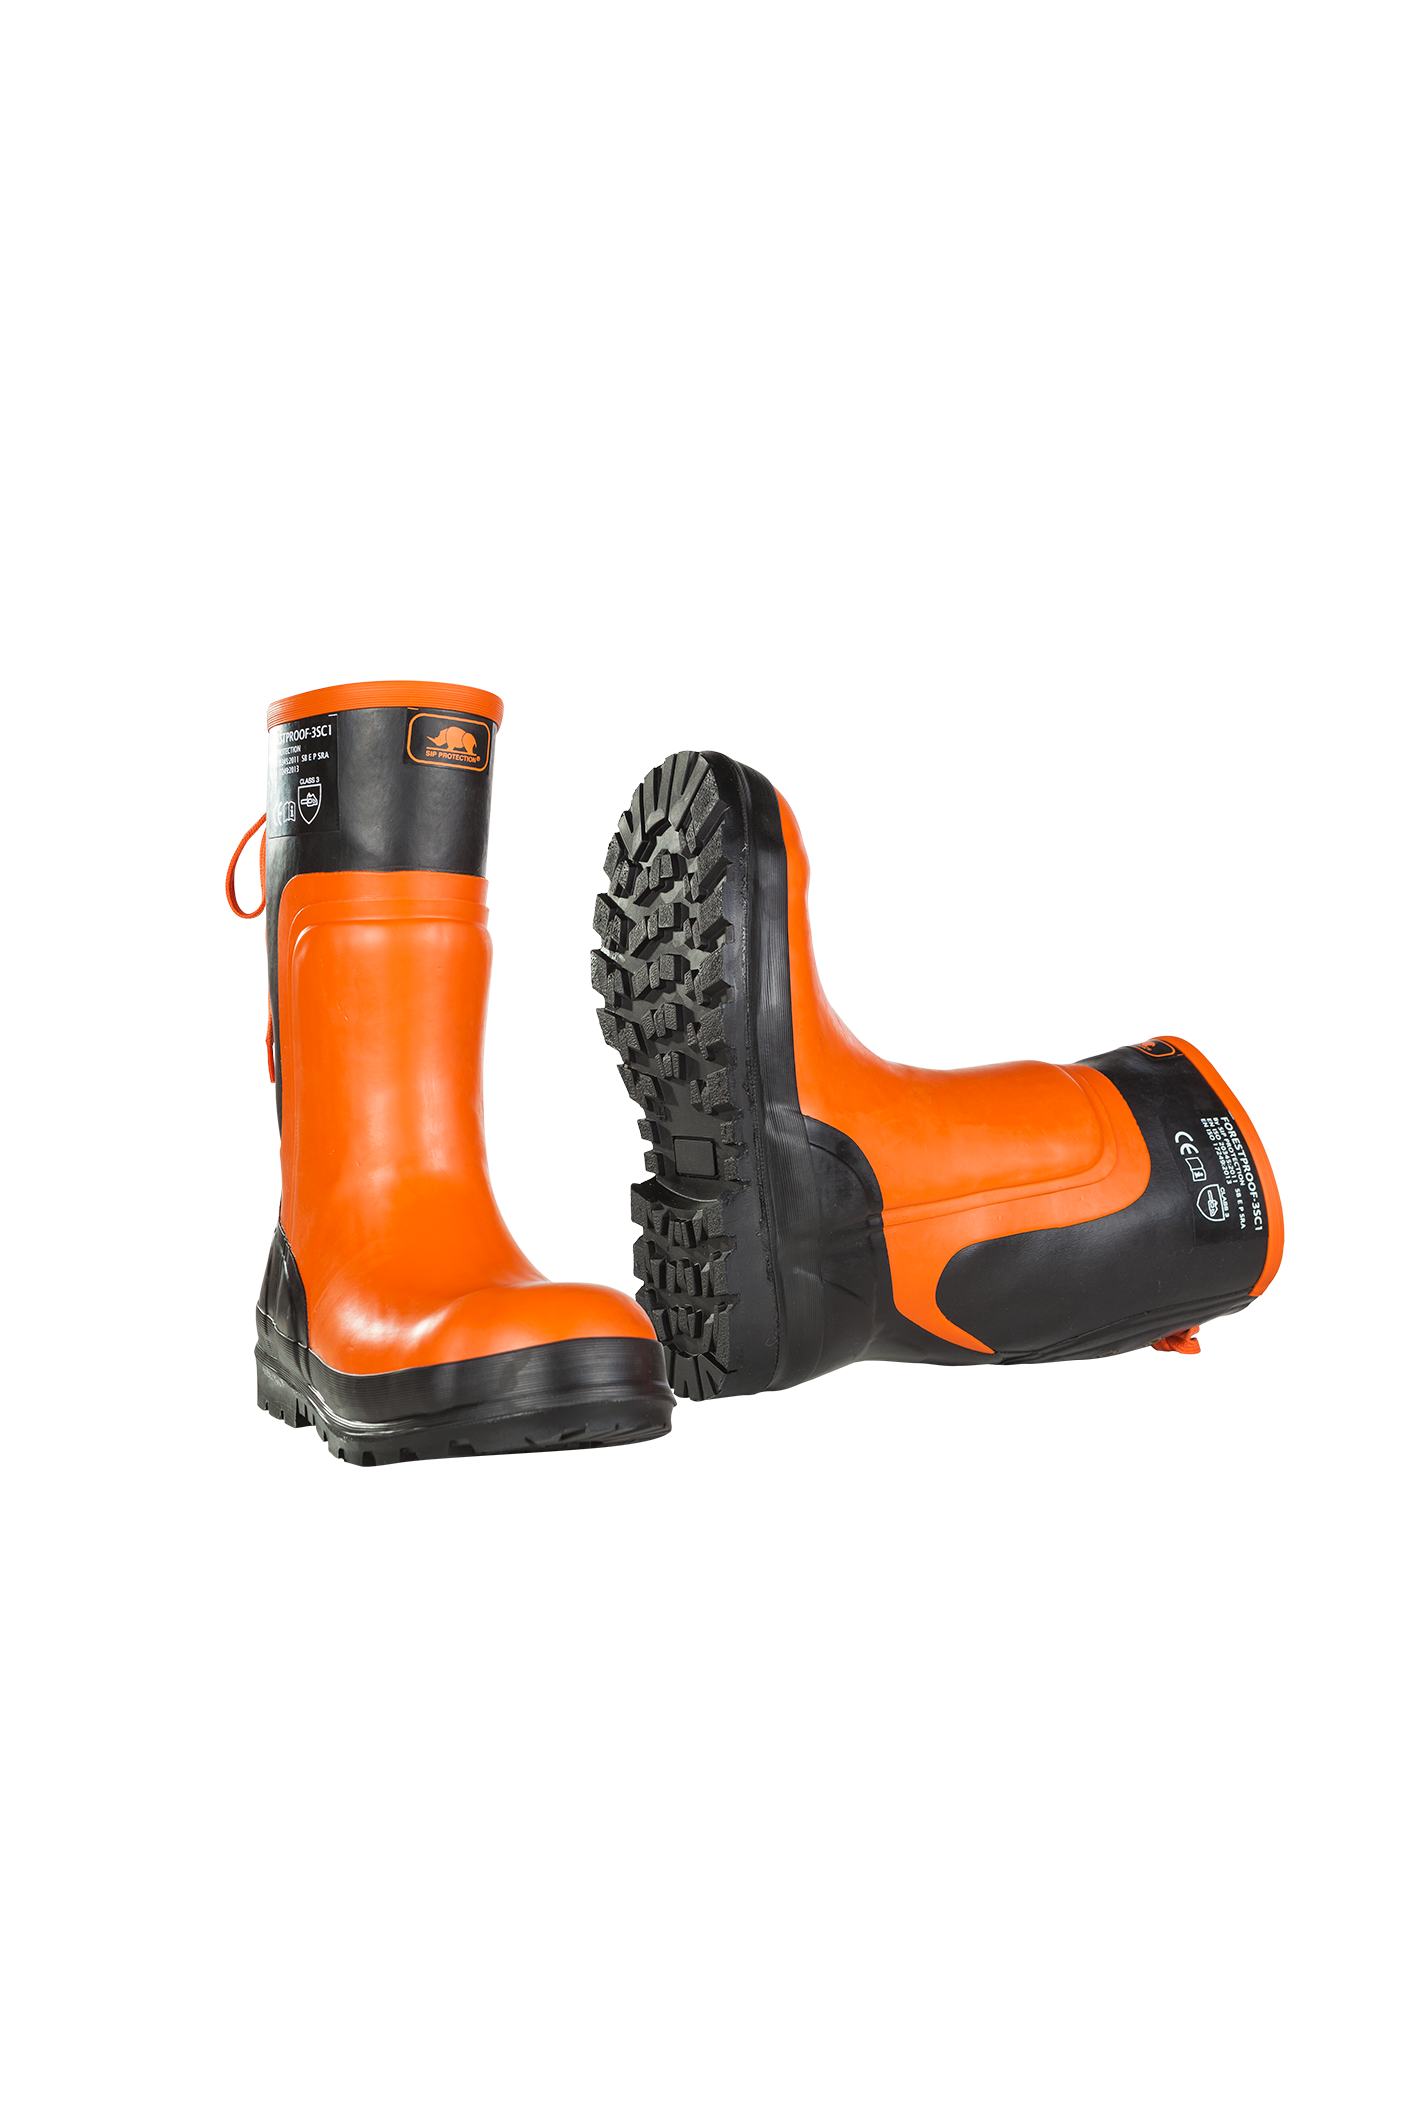 Bottes anti-coupures Forestproof classe 3 Sip Protection